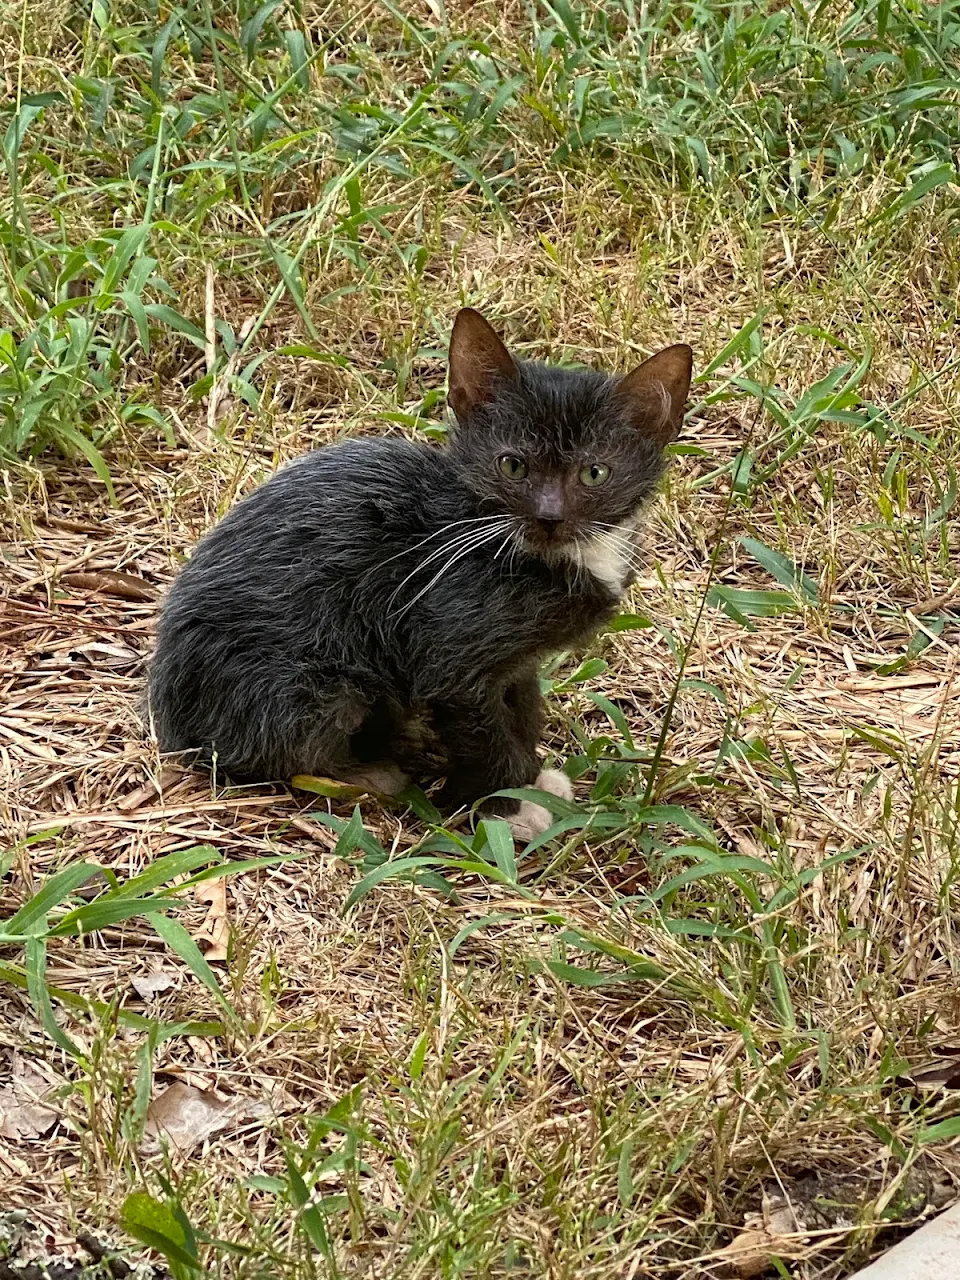 I did it. I caught this baby an hour ago and put them in my bathroom. Kind of freaking out since I have 2 dogs and a cat but they’re so small and alway cry for me when I feed them. Side note, anyone want a werewolf cat? 😂